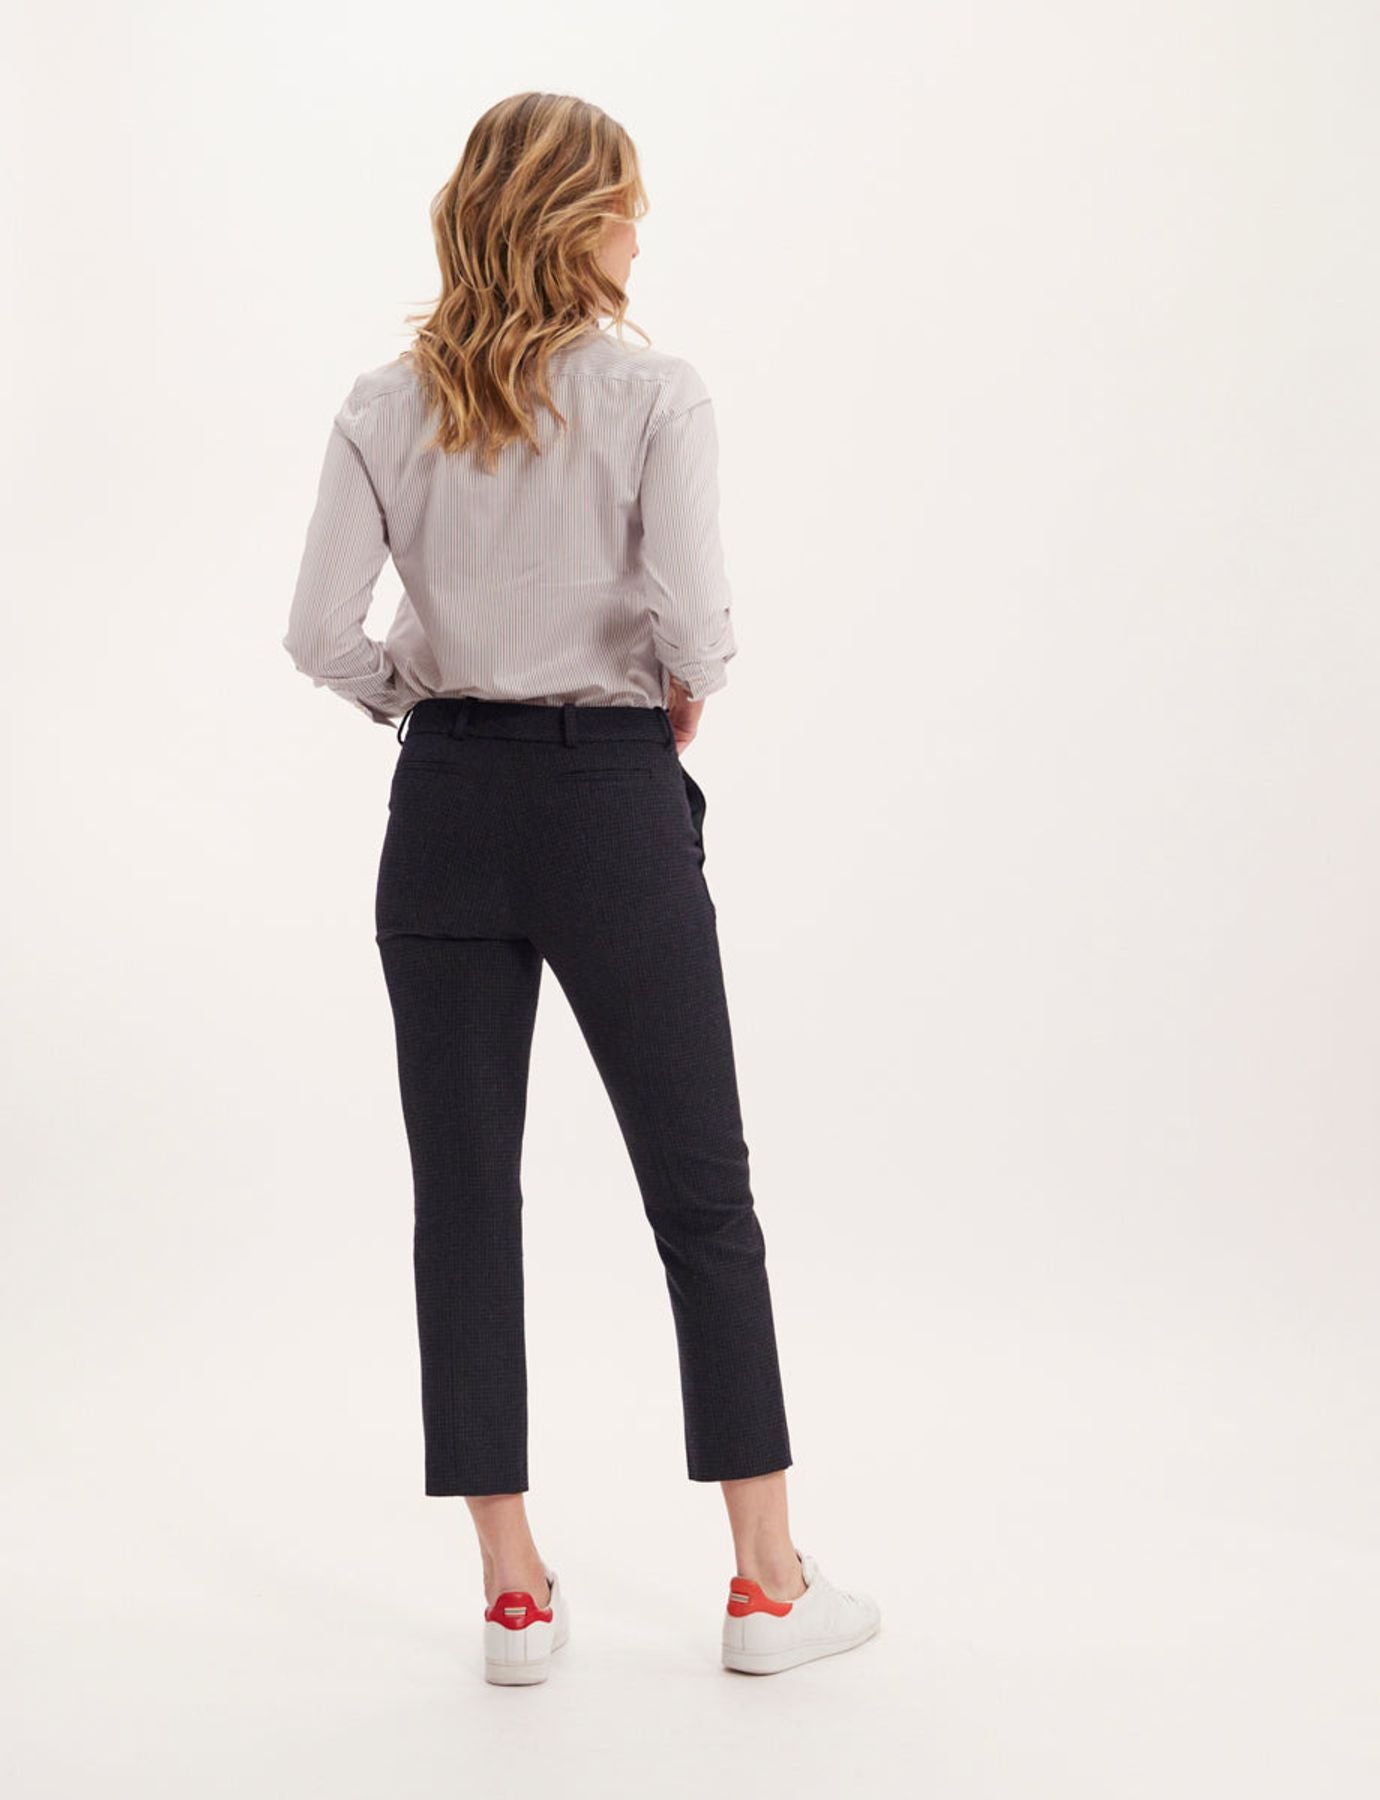 trousers-audrey-black-and-blue